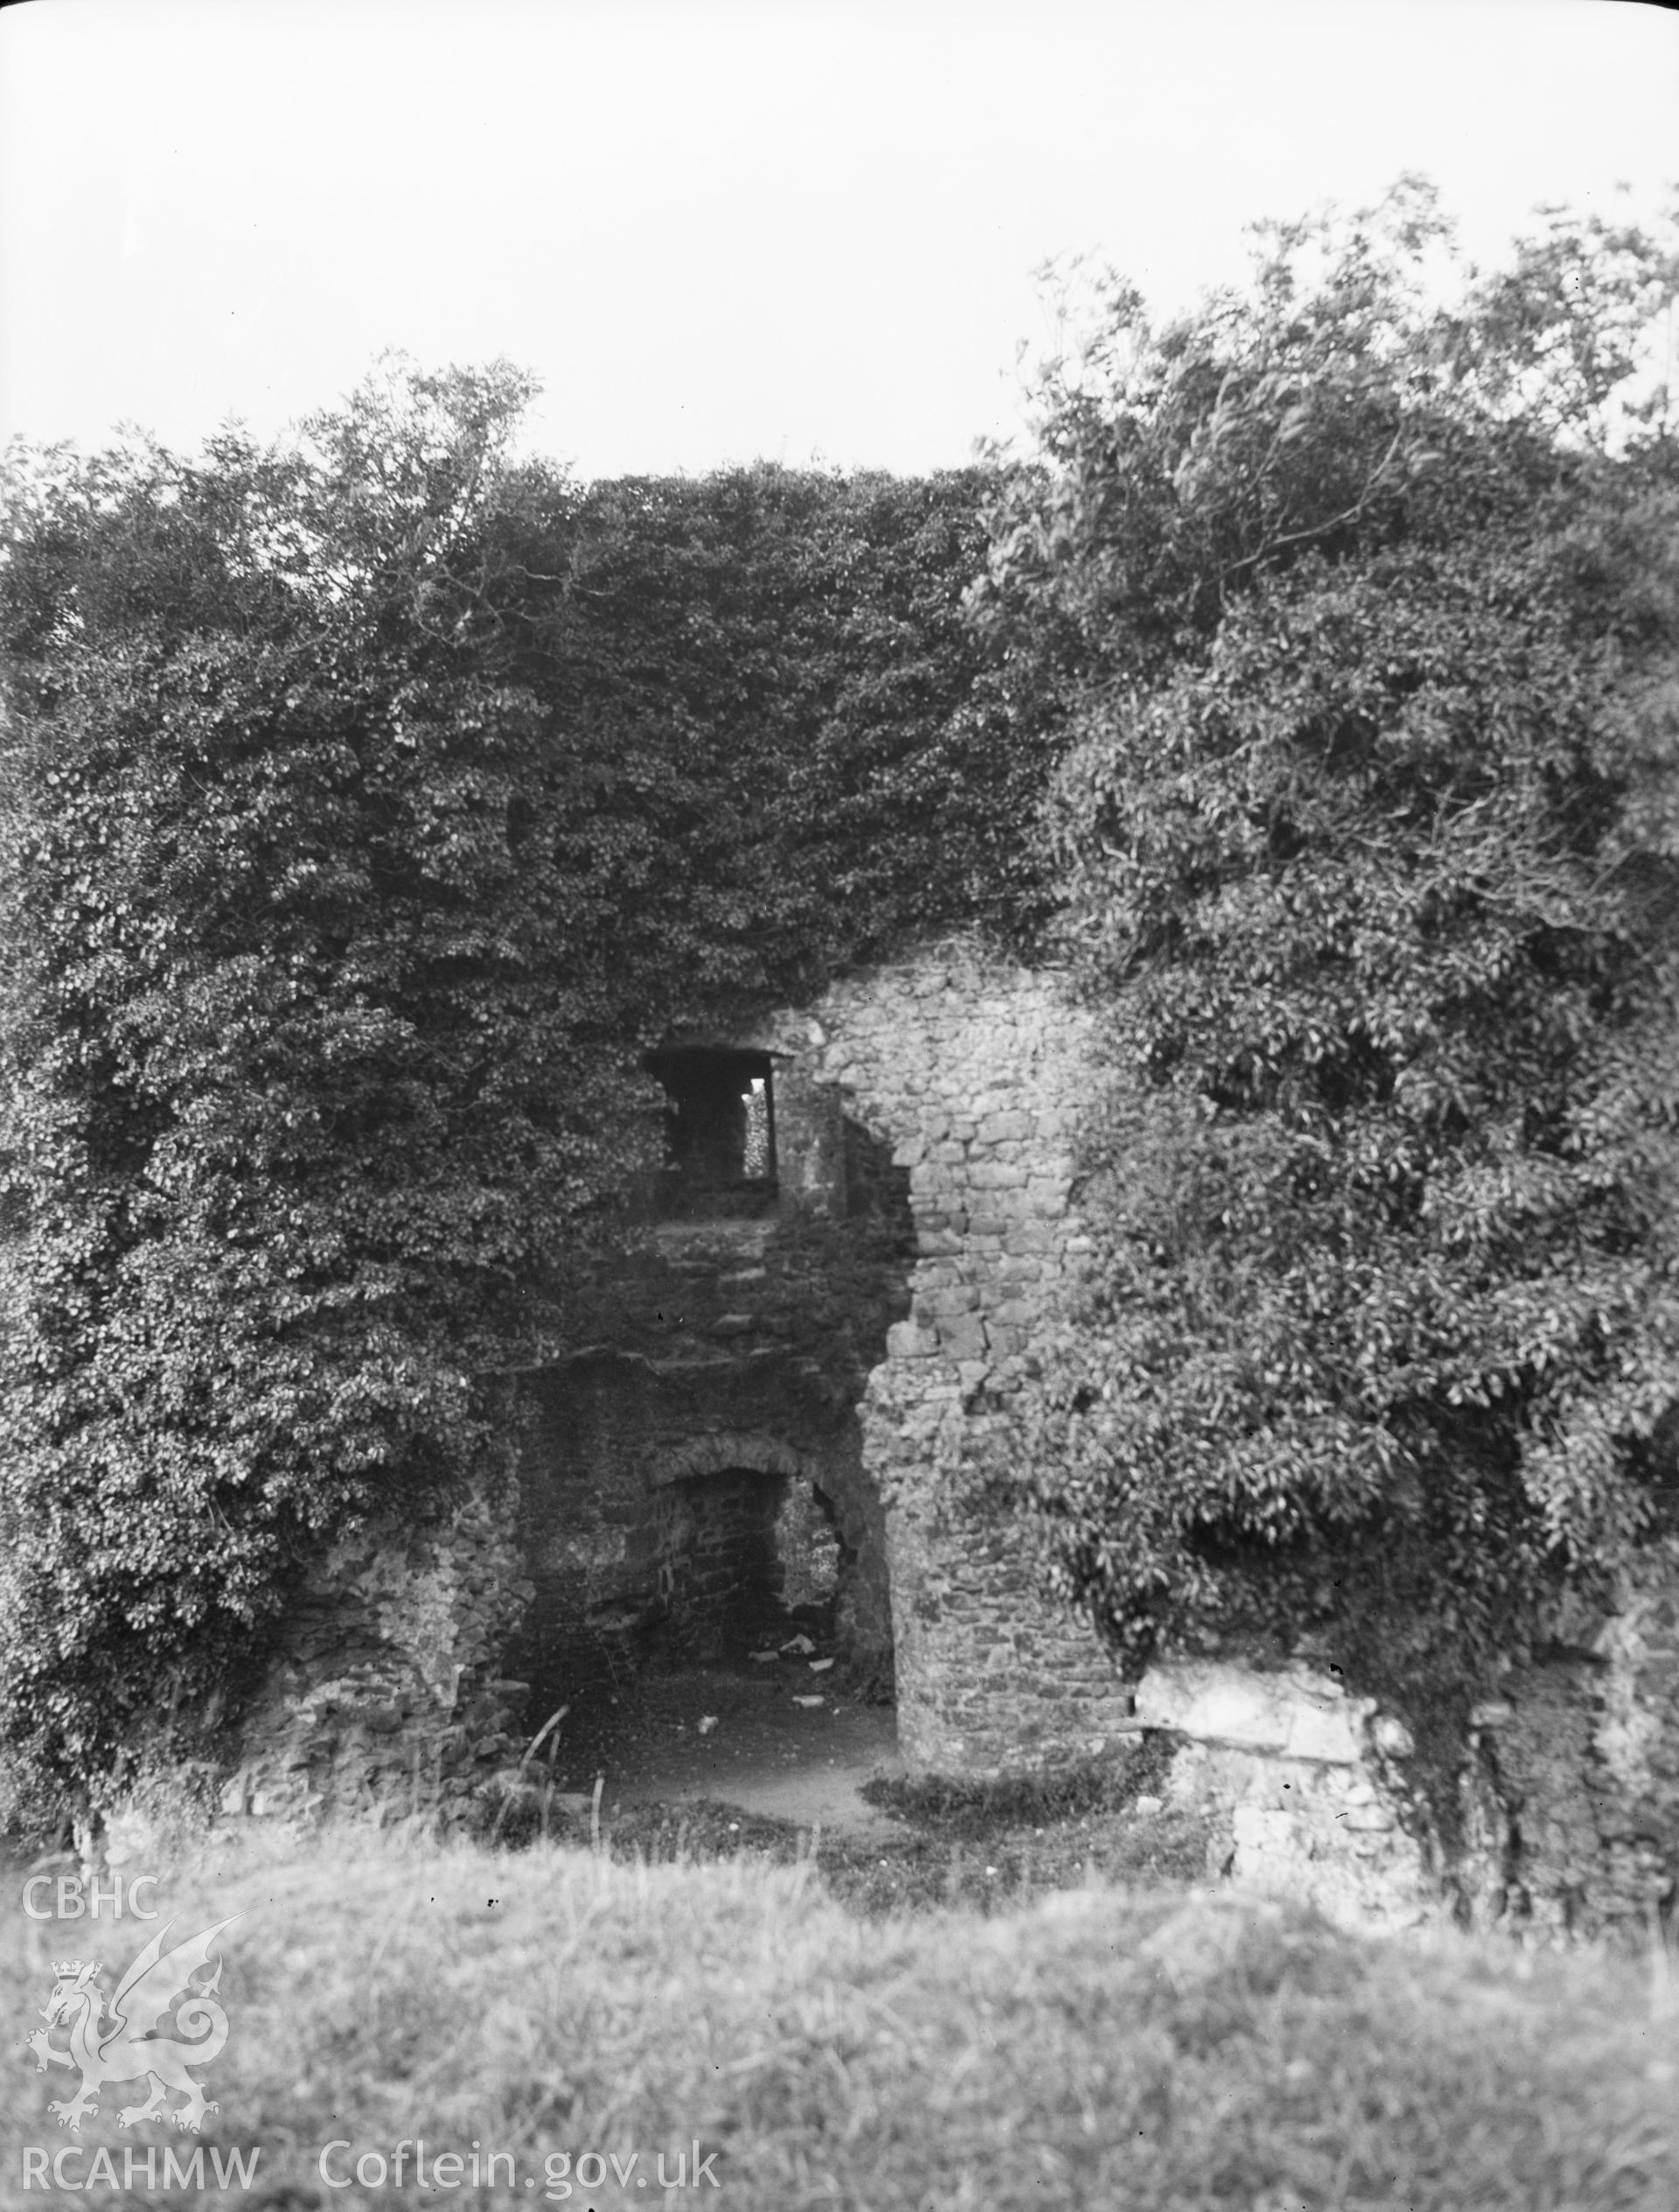 Digital copy of a nitrate negative showing view of Narberth Castle ruins. From the National Building Record Postcard Collection. From the National Building Record Postcard Collection.